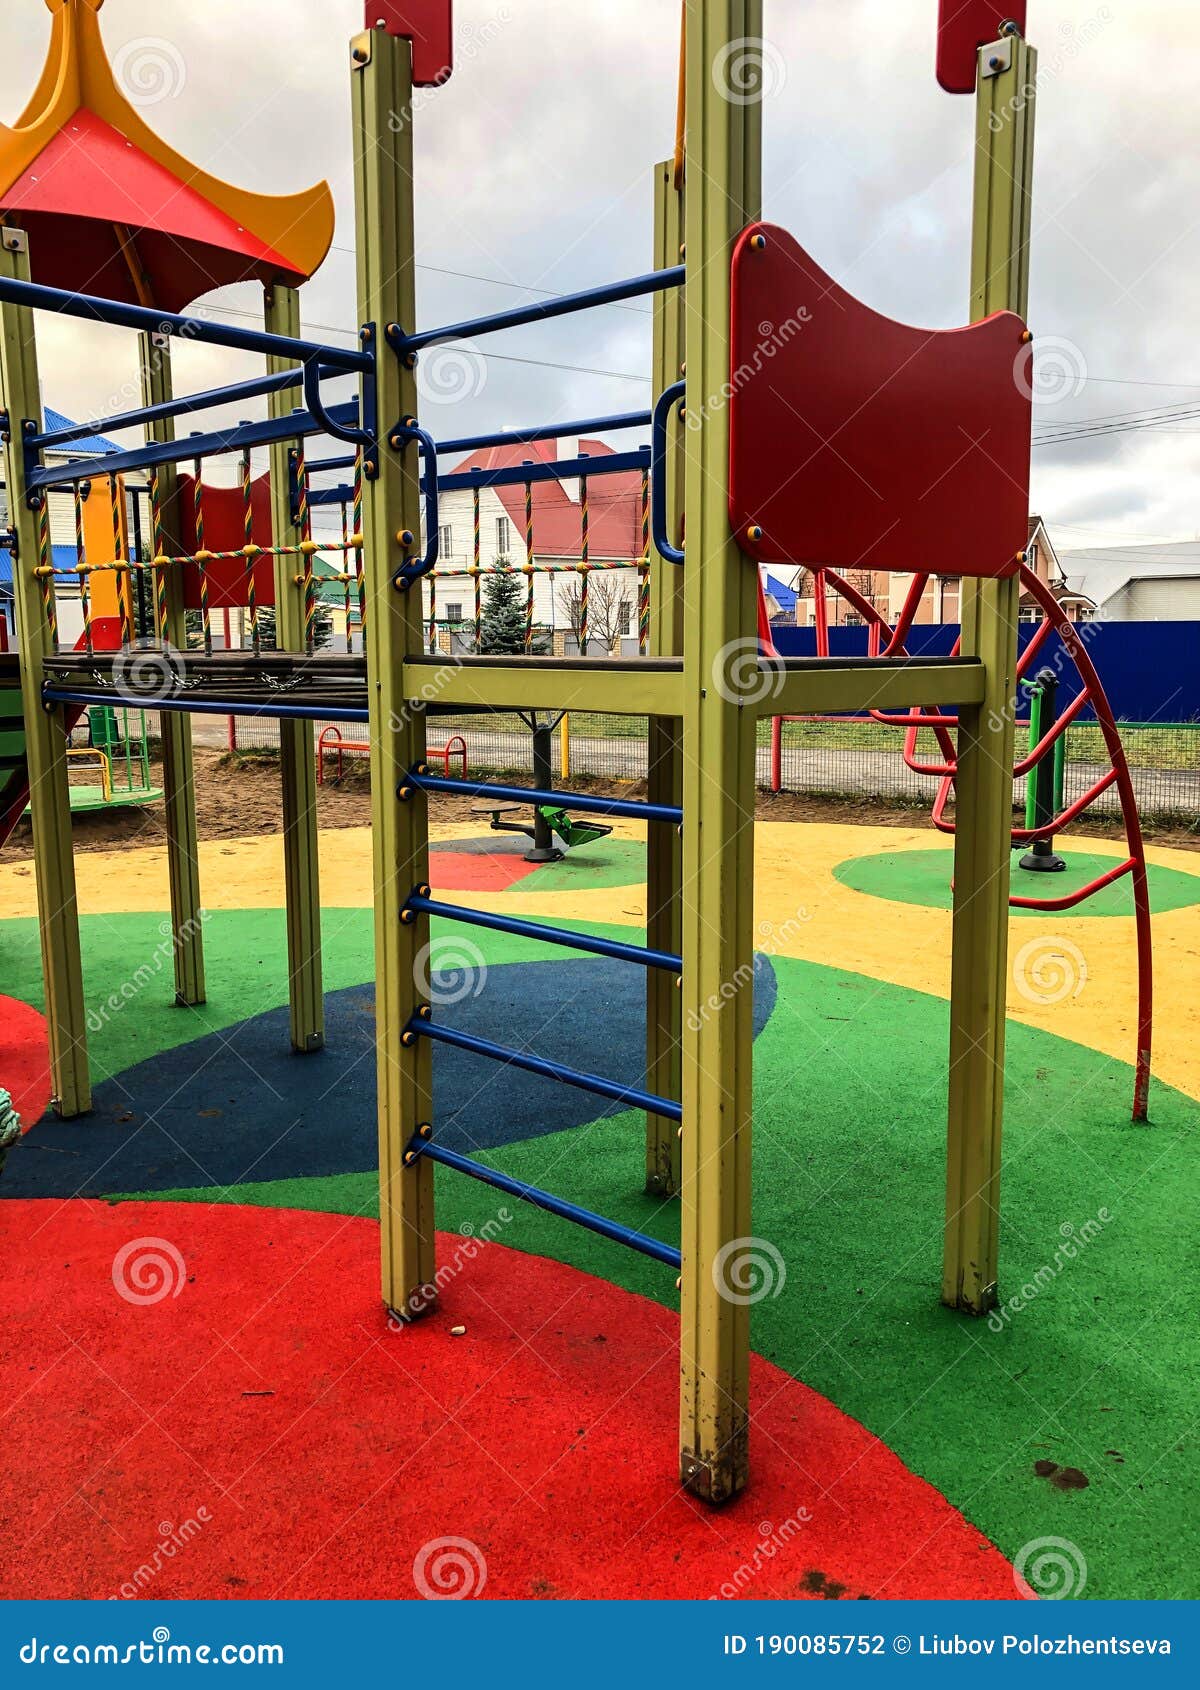 Playground Slides Swings A Ladder In City Park Stock Photo Image